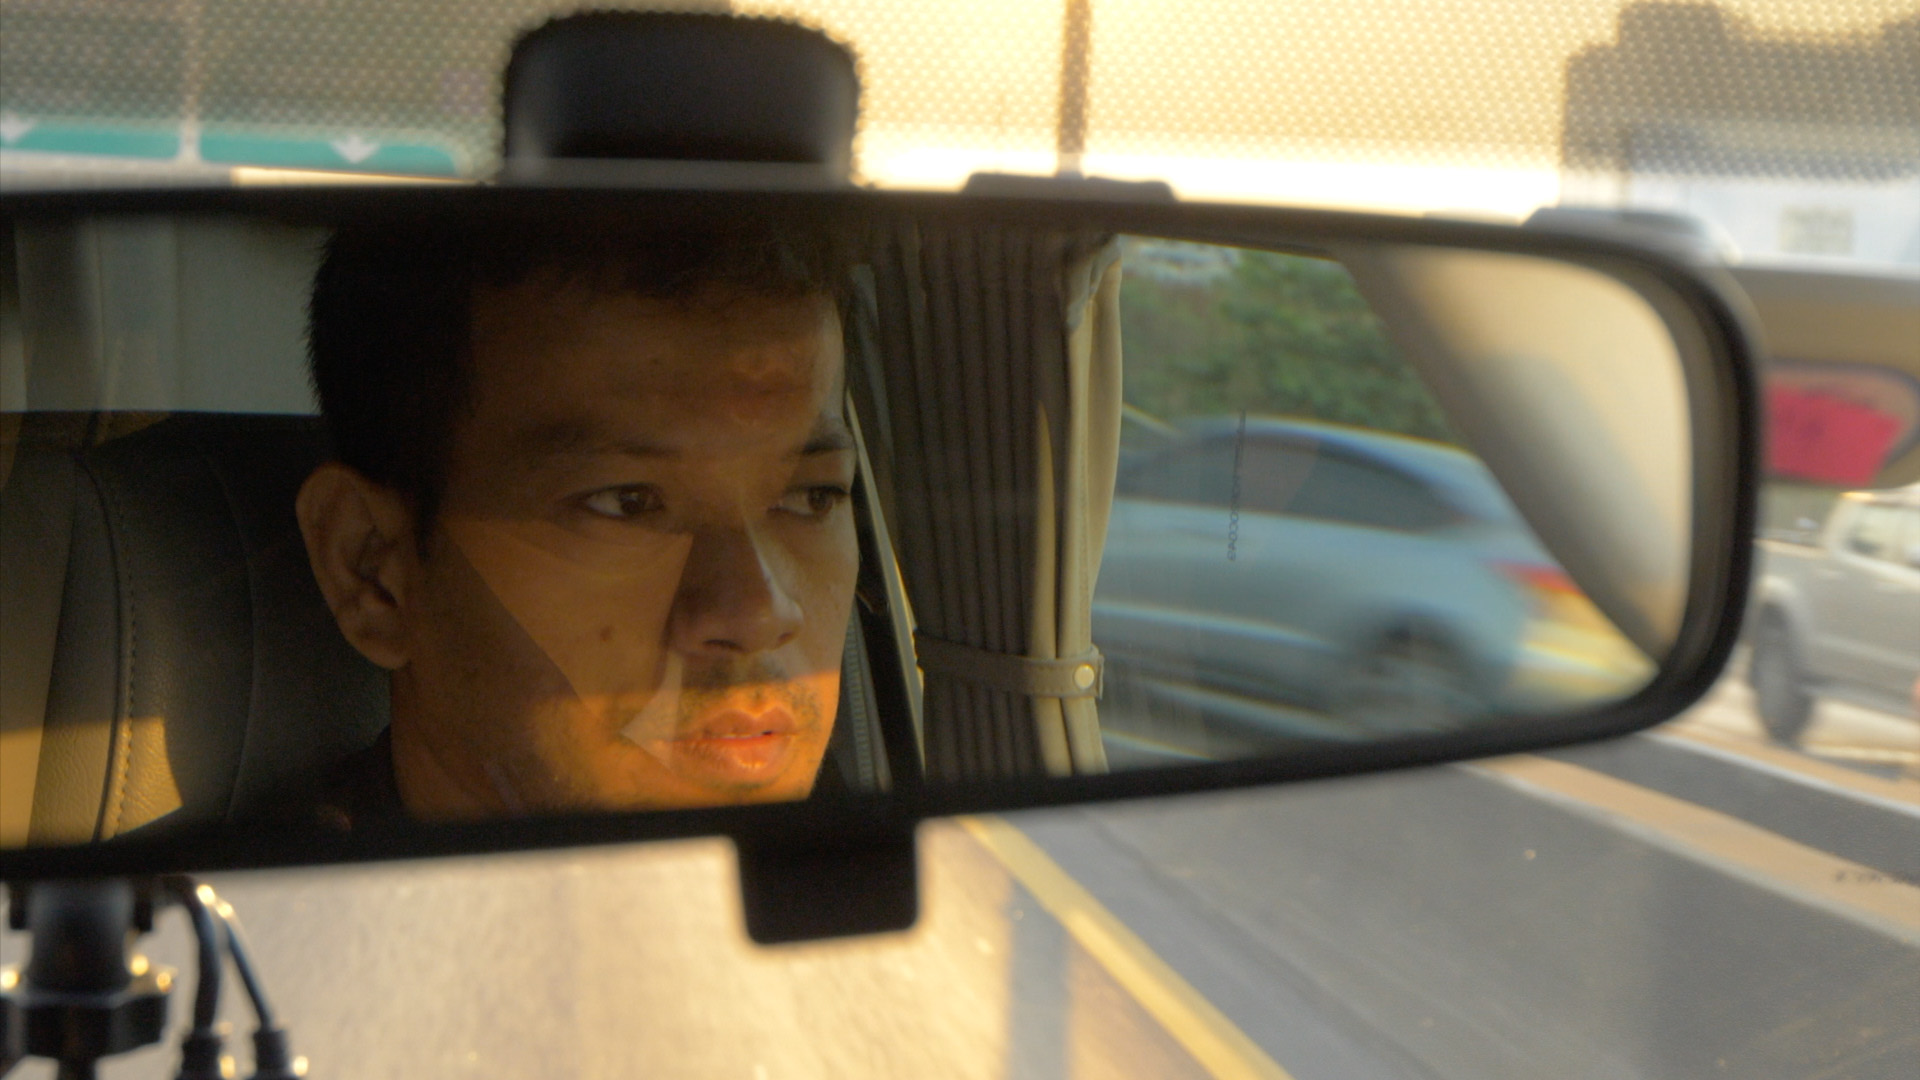 Face of man driving car reflected on rear-view mirror